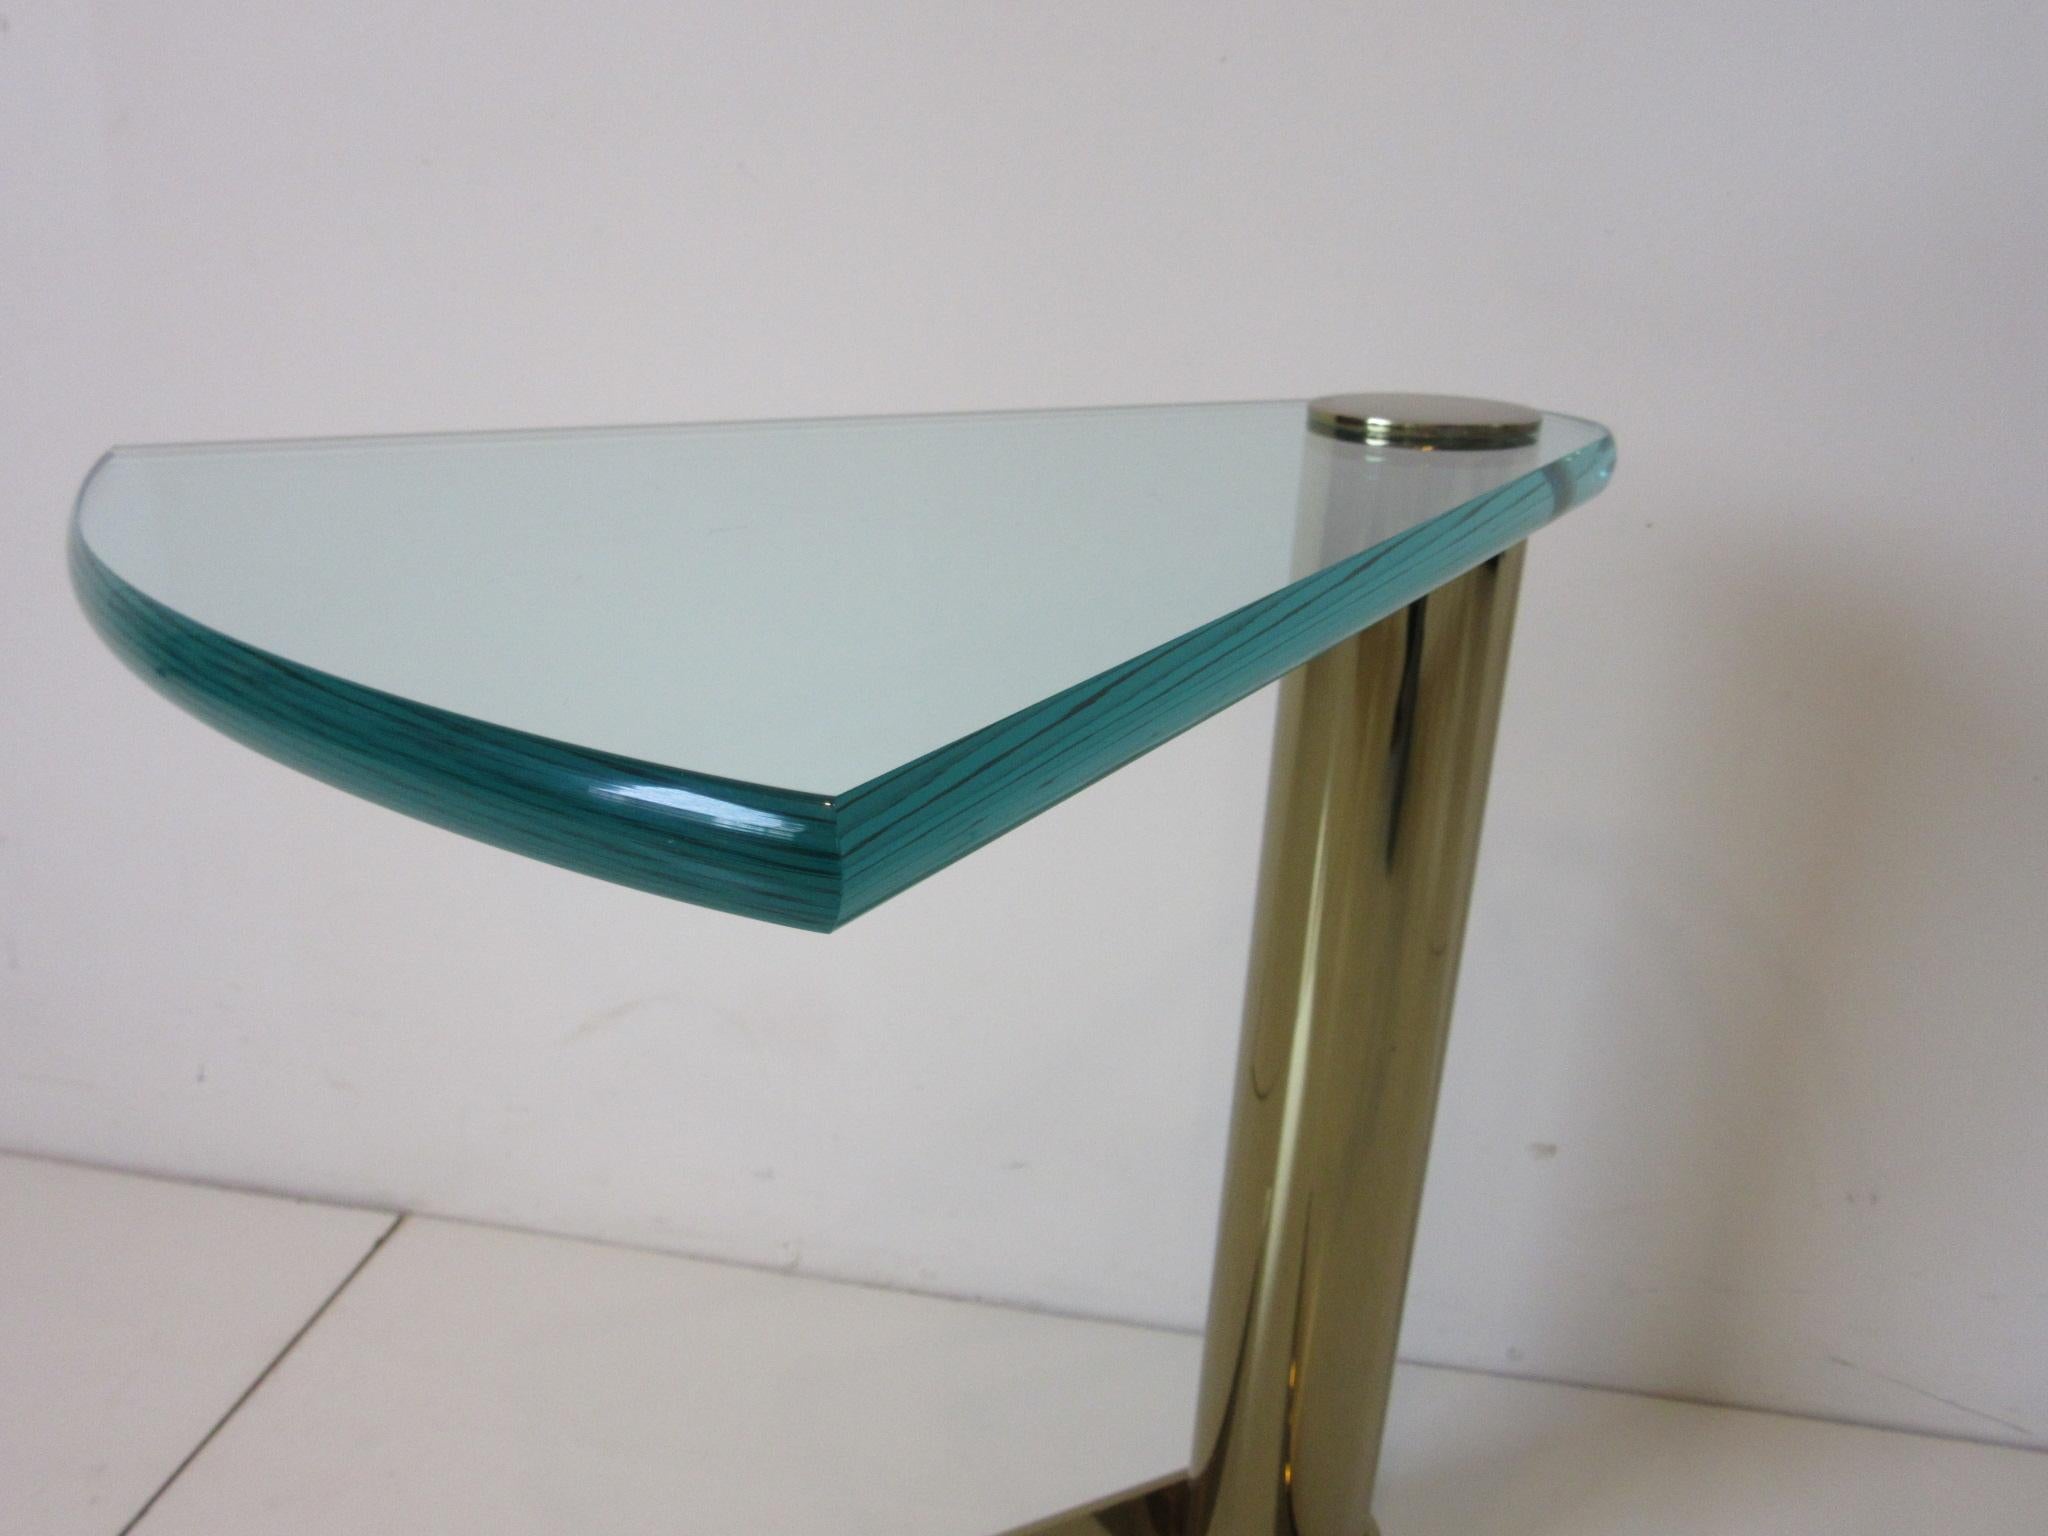 Wedge Brass / Glass Side Table from the Leon Pace Collection 1